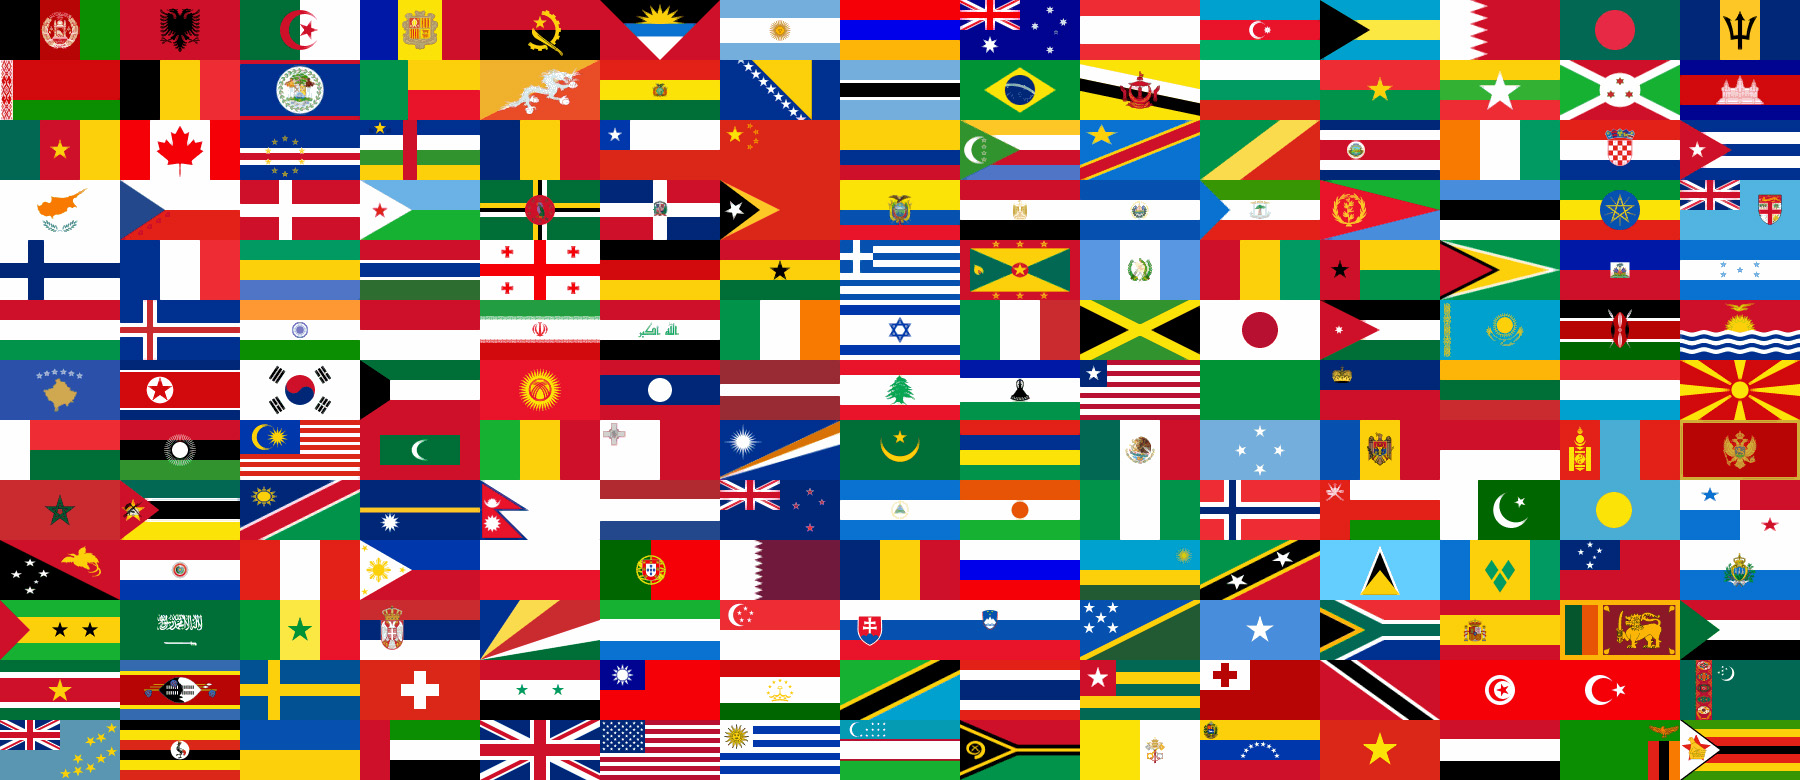 National Flags - We gave advanced warning to ALL nation states through the United Nations. We have been planning all this out for Ken's entire lifetime. We all got together and said, 'Screw it!' This is the bottom line. DROID Ken is our computer-aided peaceful and nonviolent CIVILIAN genius in the NONPROFIT PRIVATE SECTOR who got the religion problem solved with the help of the BENEVOLENT LIBERAL SECULAR LEFT LIBERTARIAN ATHEIST SCIENTIFIC COMMUNITY in the NONPROFIT PRIVATE SECTOR.